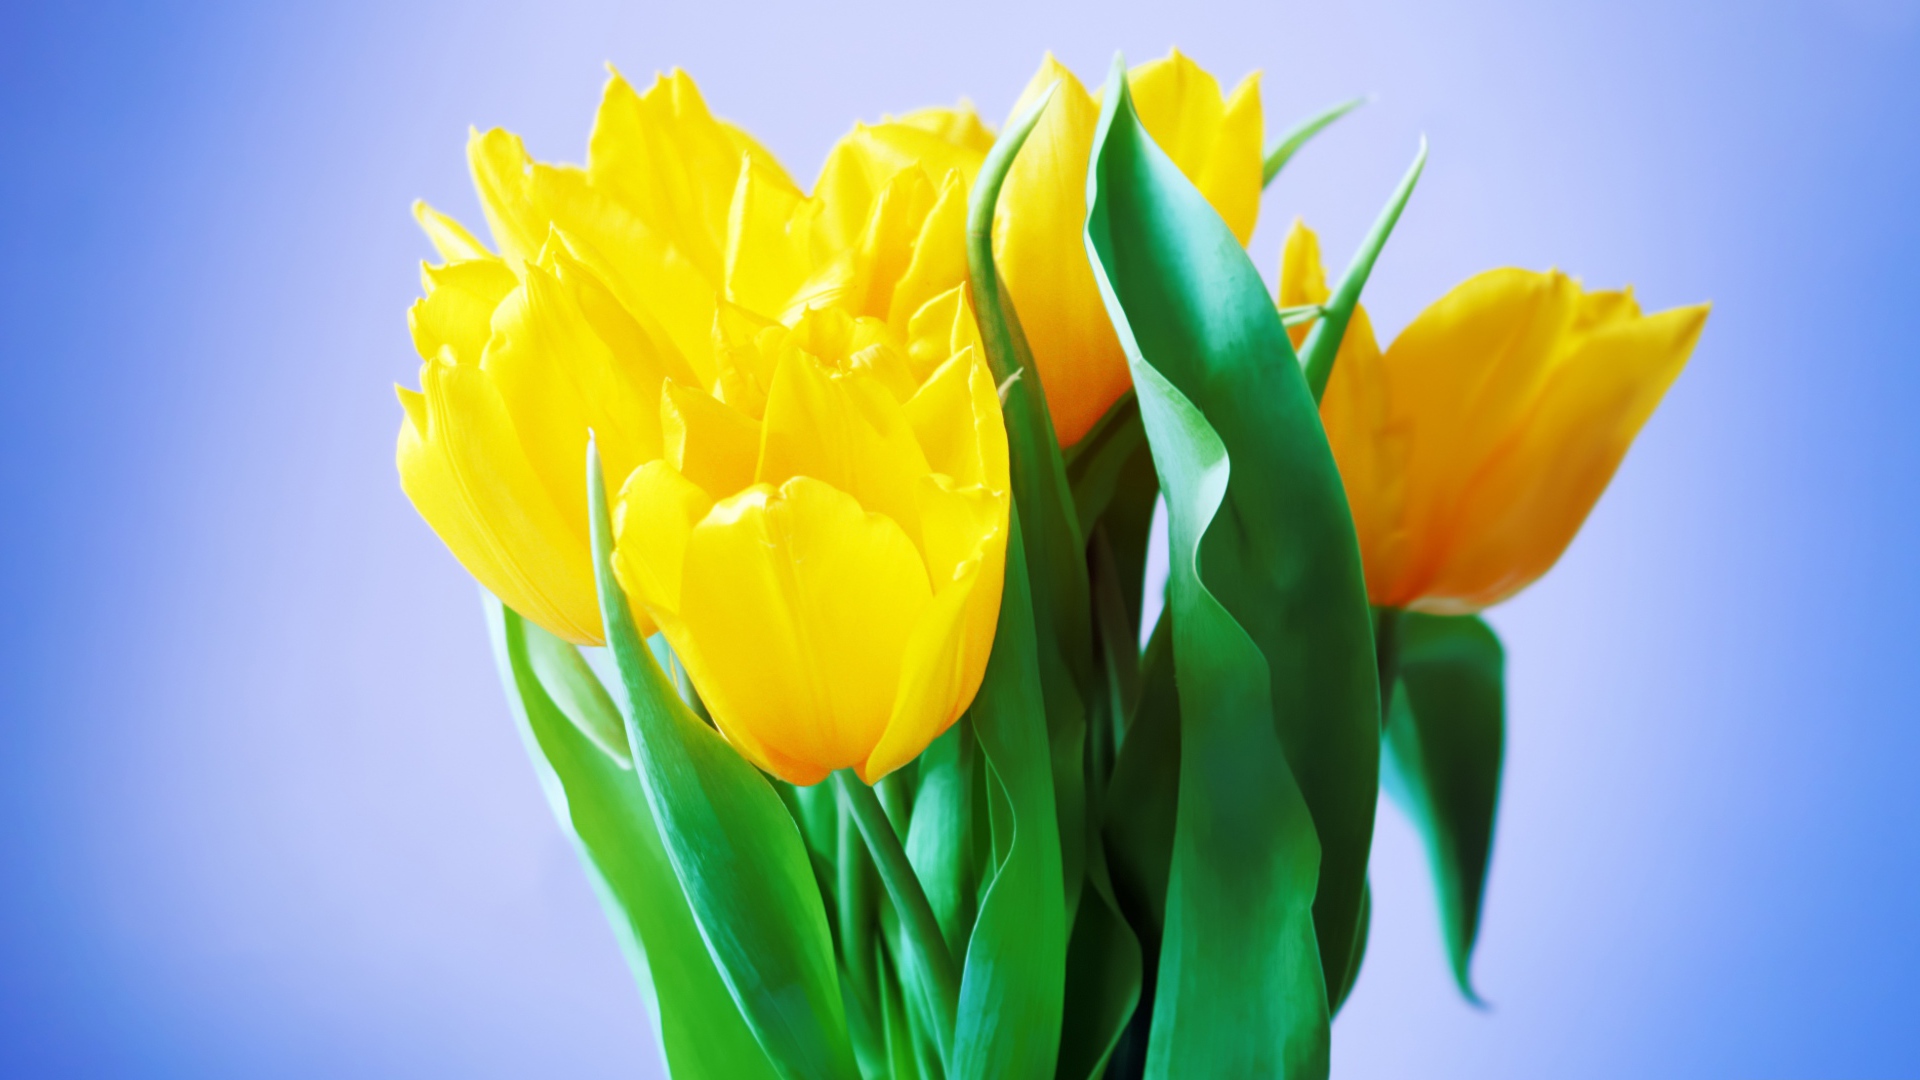 Bouquet of delicate yellow tulips on a blue background